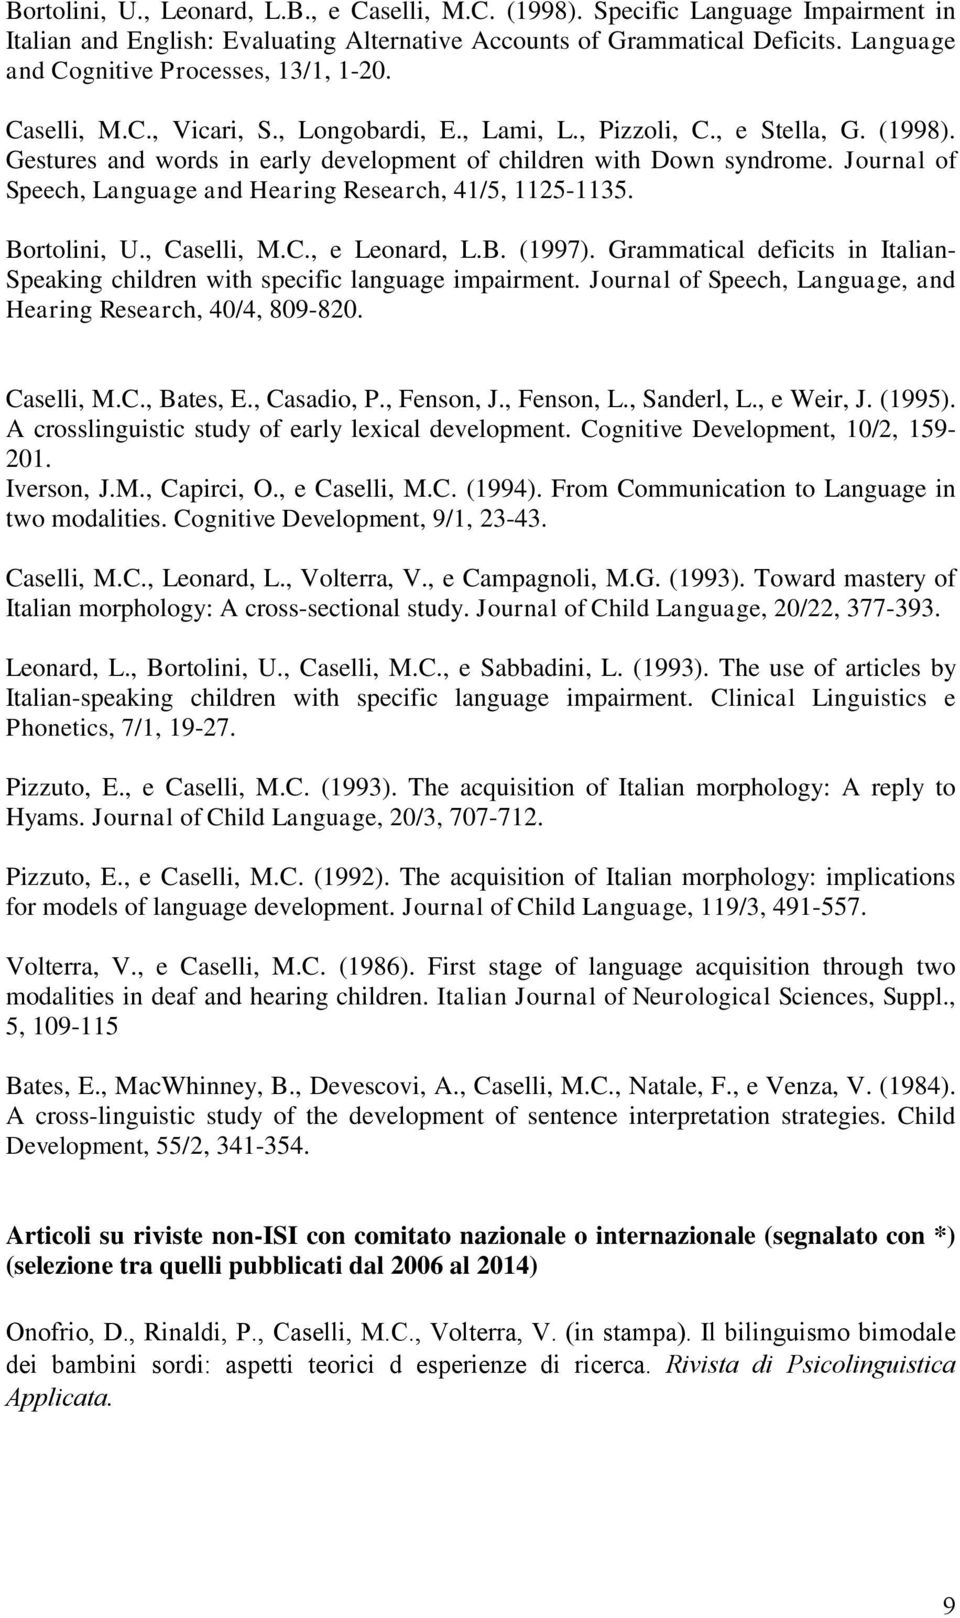 Gestures and words in early development of children with Down syndrome. Journal of Speech, Language and Hearing Research, 41/5, 1125-1135. Bortolini, U., Caselli, M.C., e Leonard, L.B. (1997).